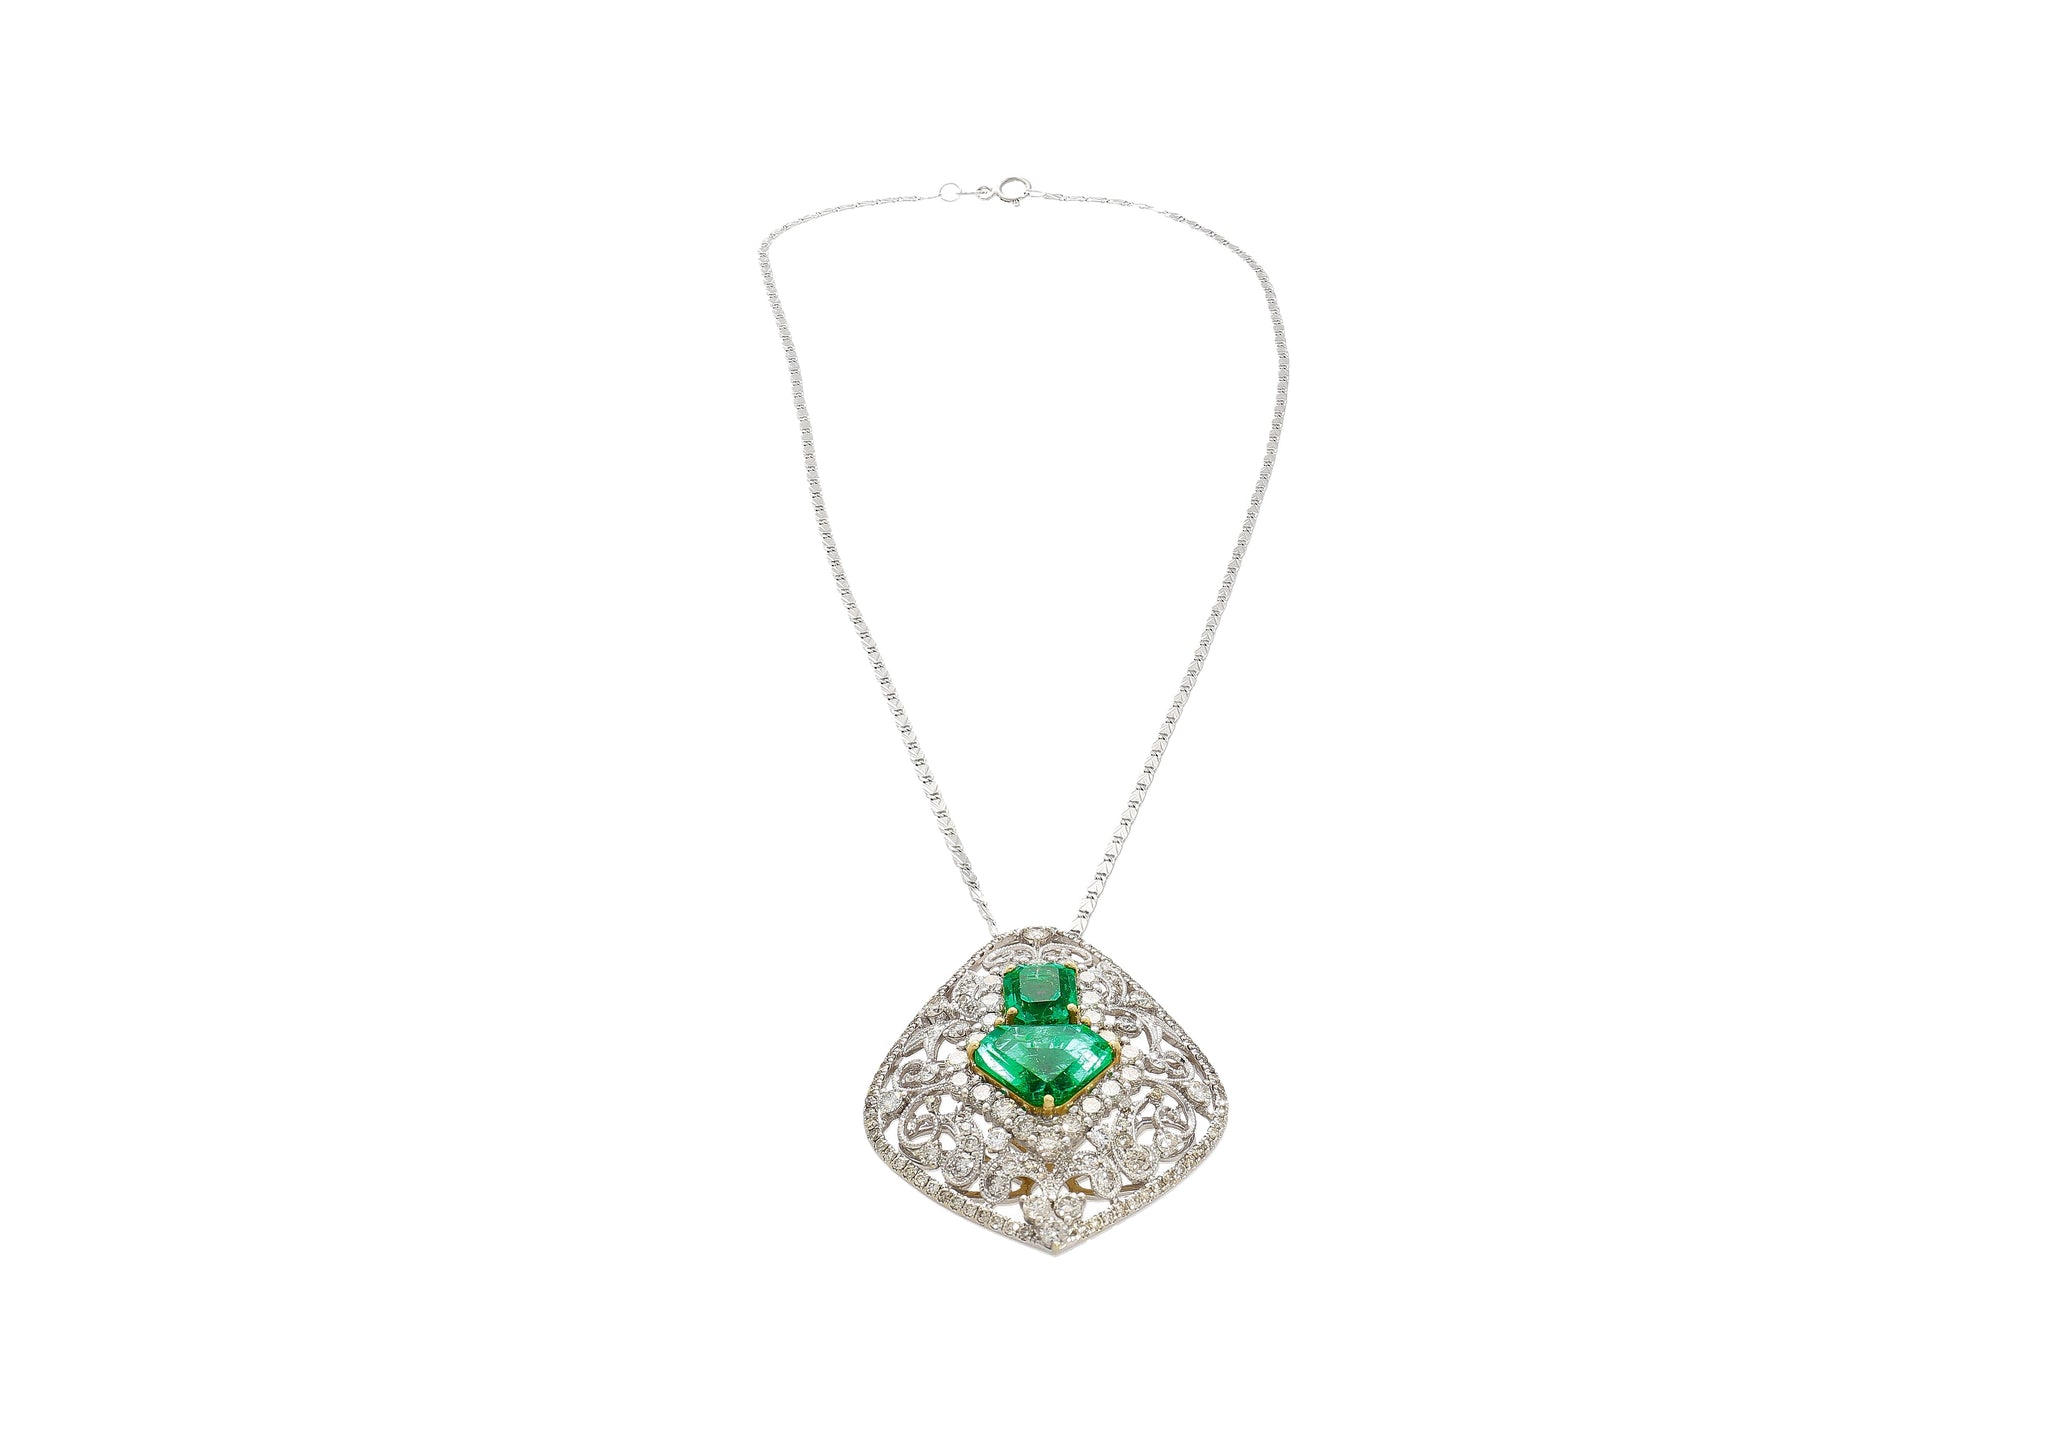 Vintage Art Nouveau Style Carved 18K White Gold Pendant Necklace With Shield Cut Emerald and Diamond Side Stones